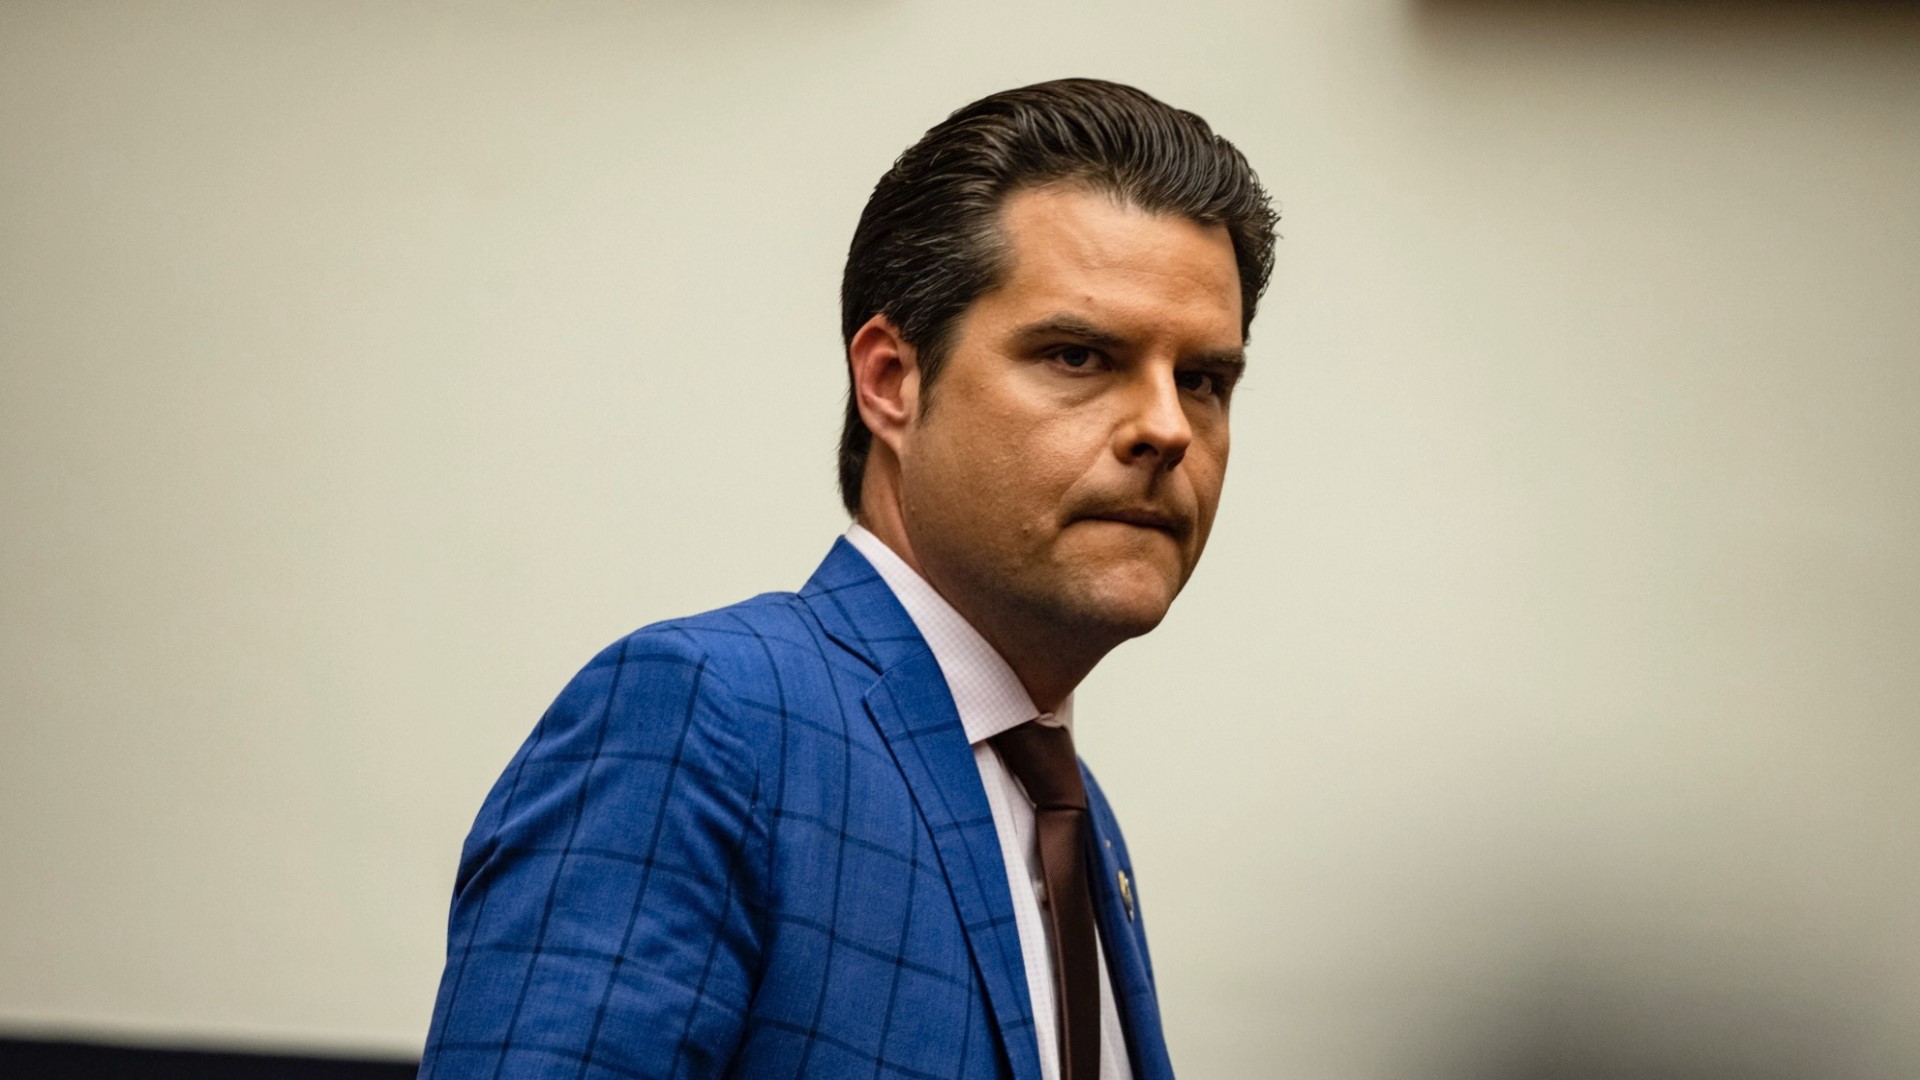 New potential clues in the reported sex trafficking investigation uncovered in Matt Gaetz's Venmo history.